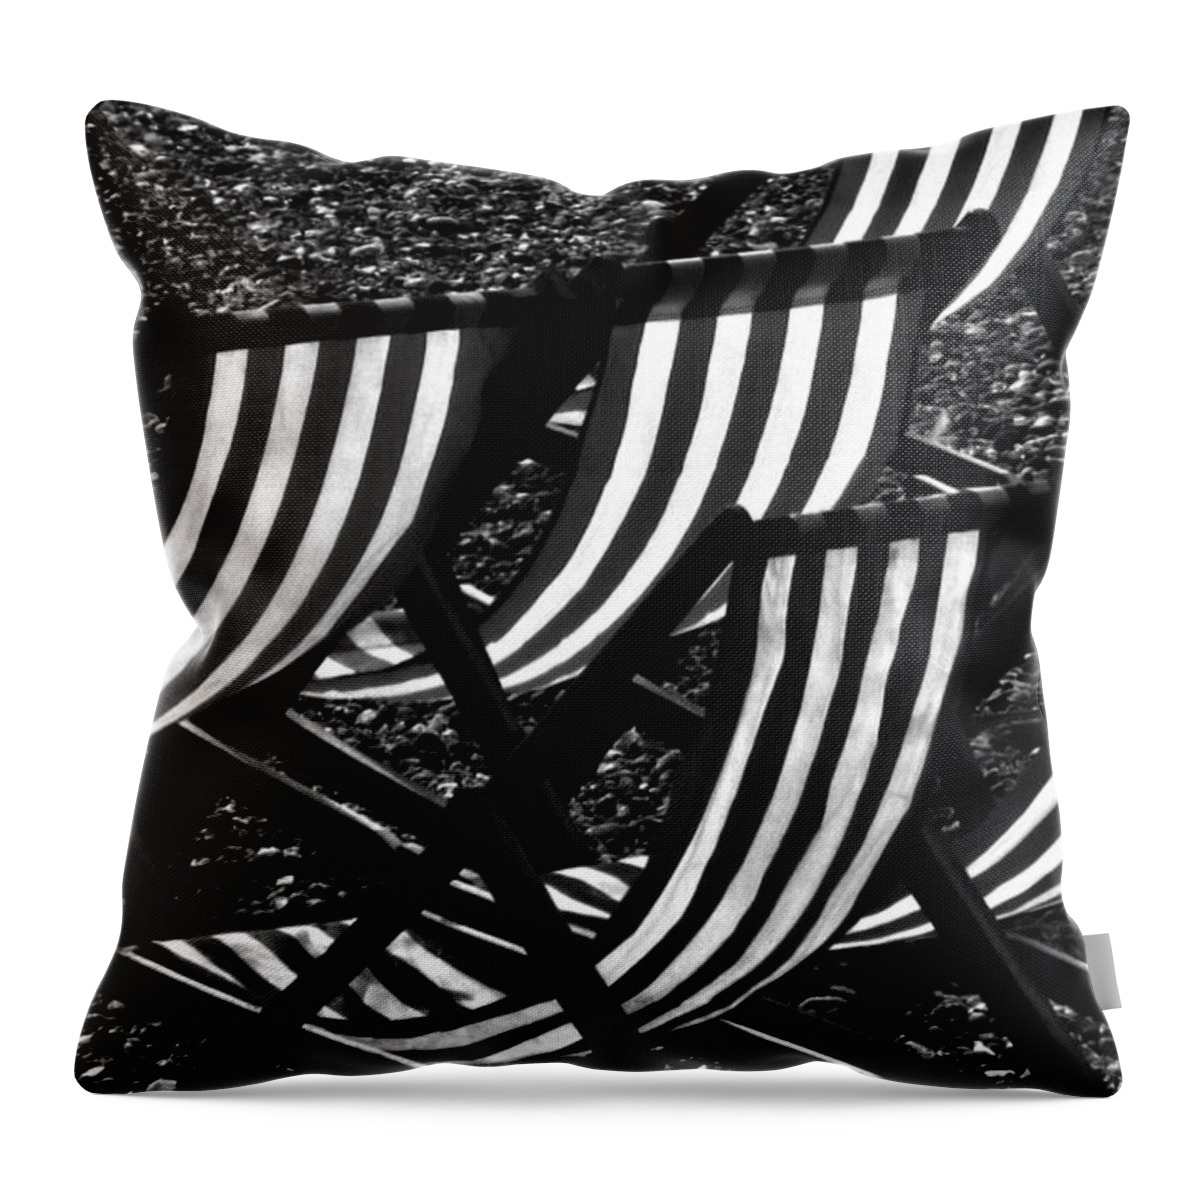 Connie Handscomb Throw Pillow featuring the photograph Multiplicity by Connie Handscomb